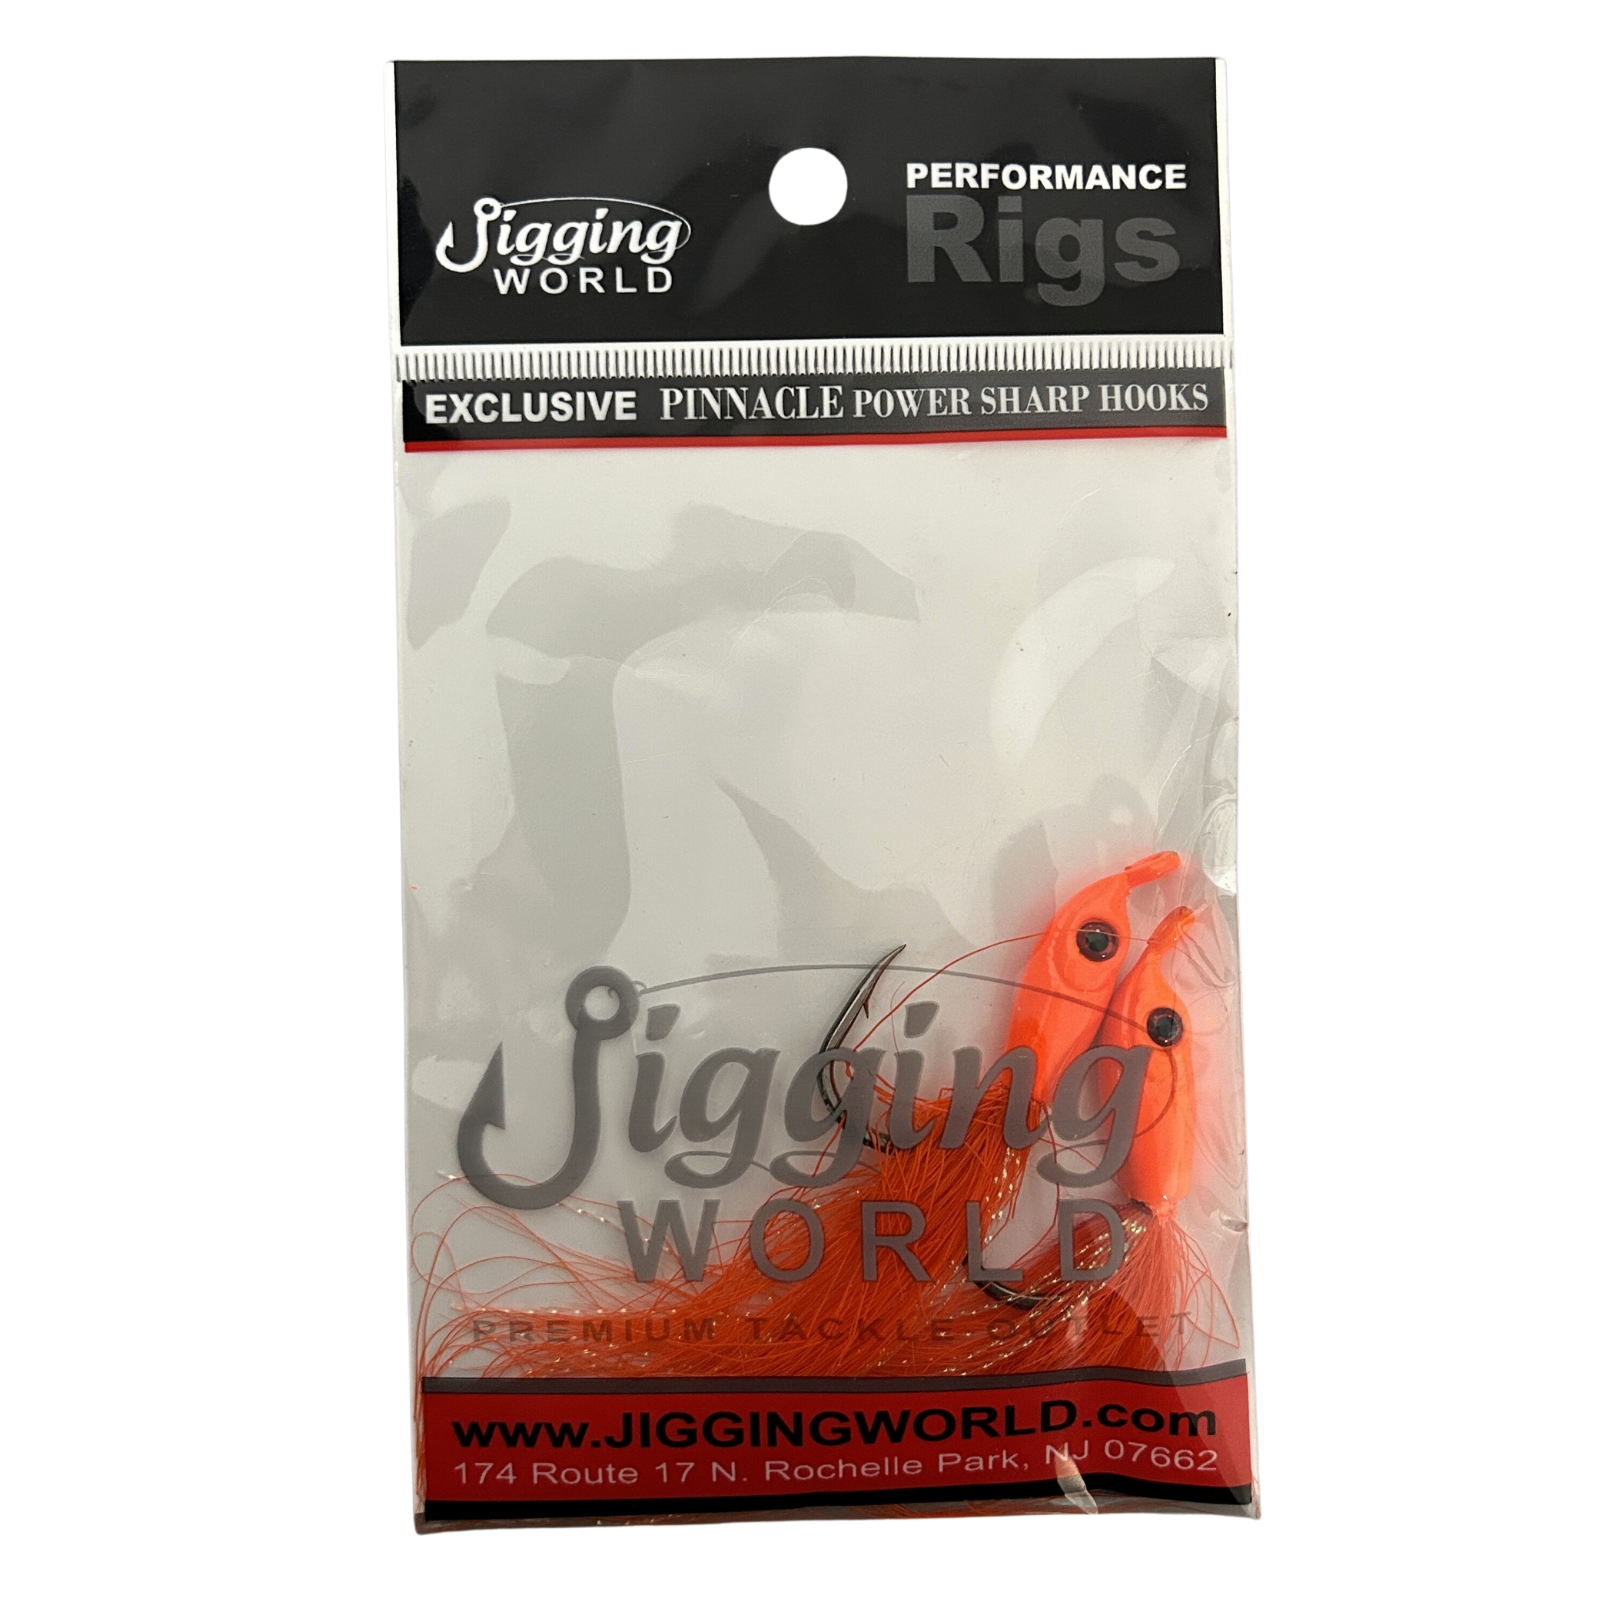 Jigging World Fluke Candy Teasers V2 with Bucktail – Tackle World